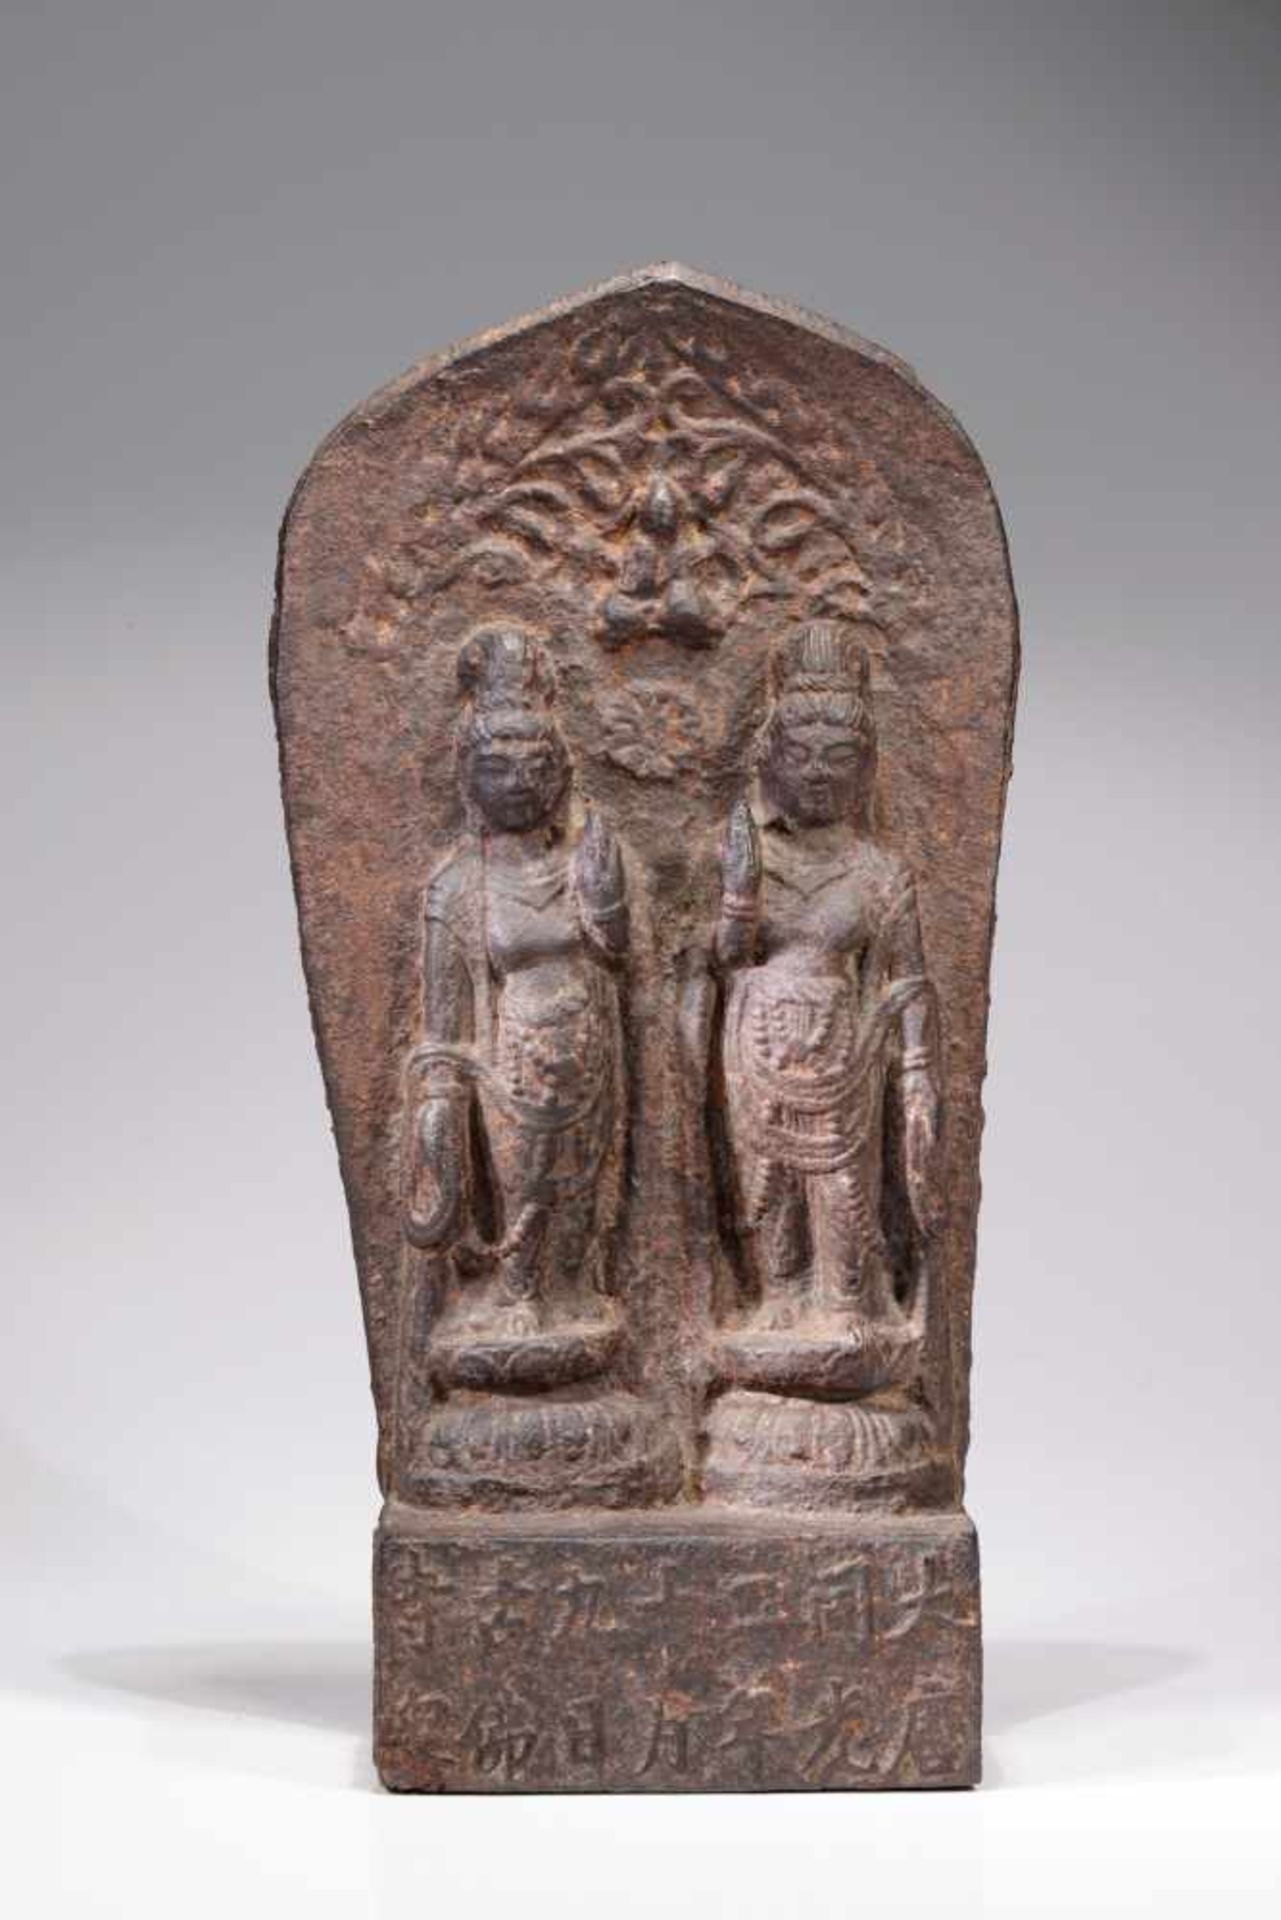 TWO GUANJINiron,China, 10th century,Size: 49 cmCast in higher rectangular form, the front and the